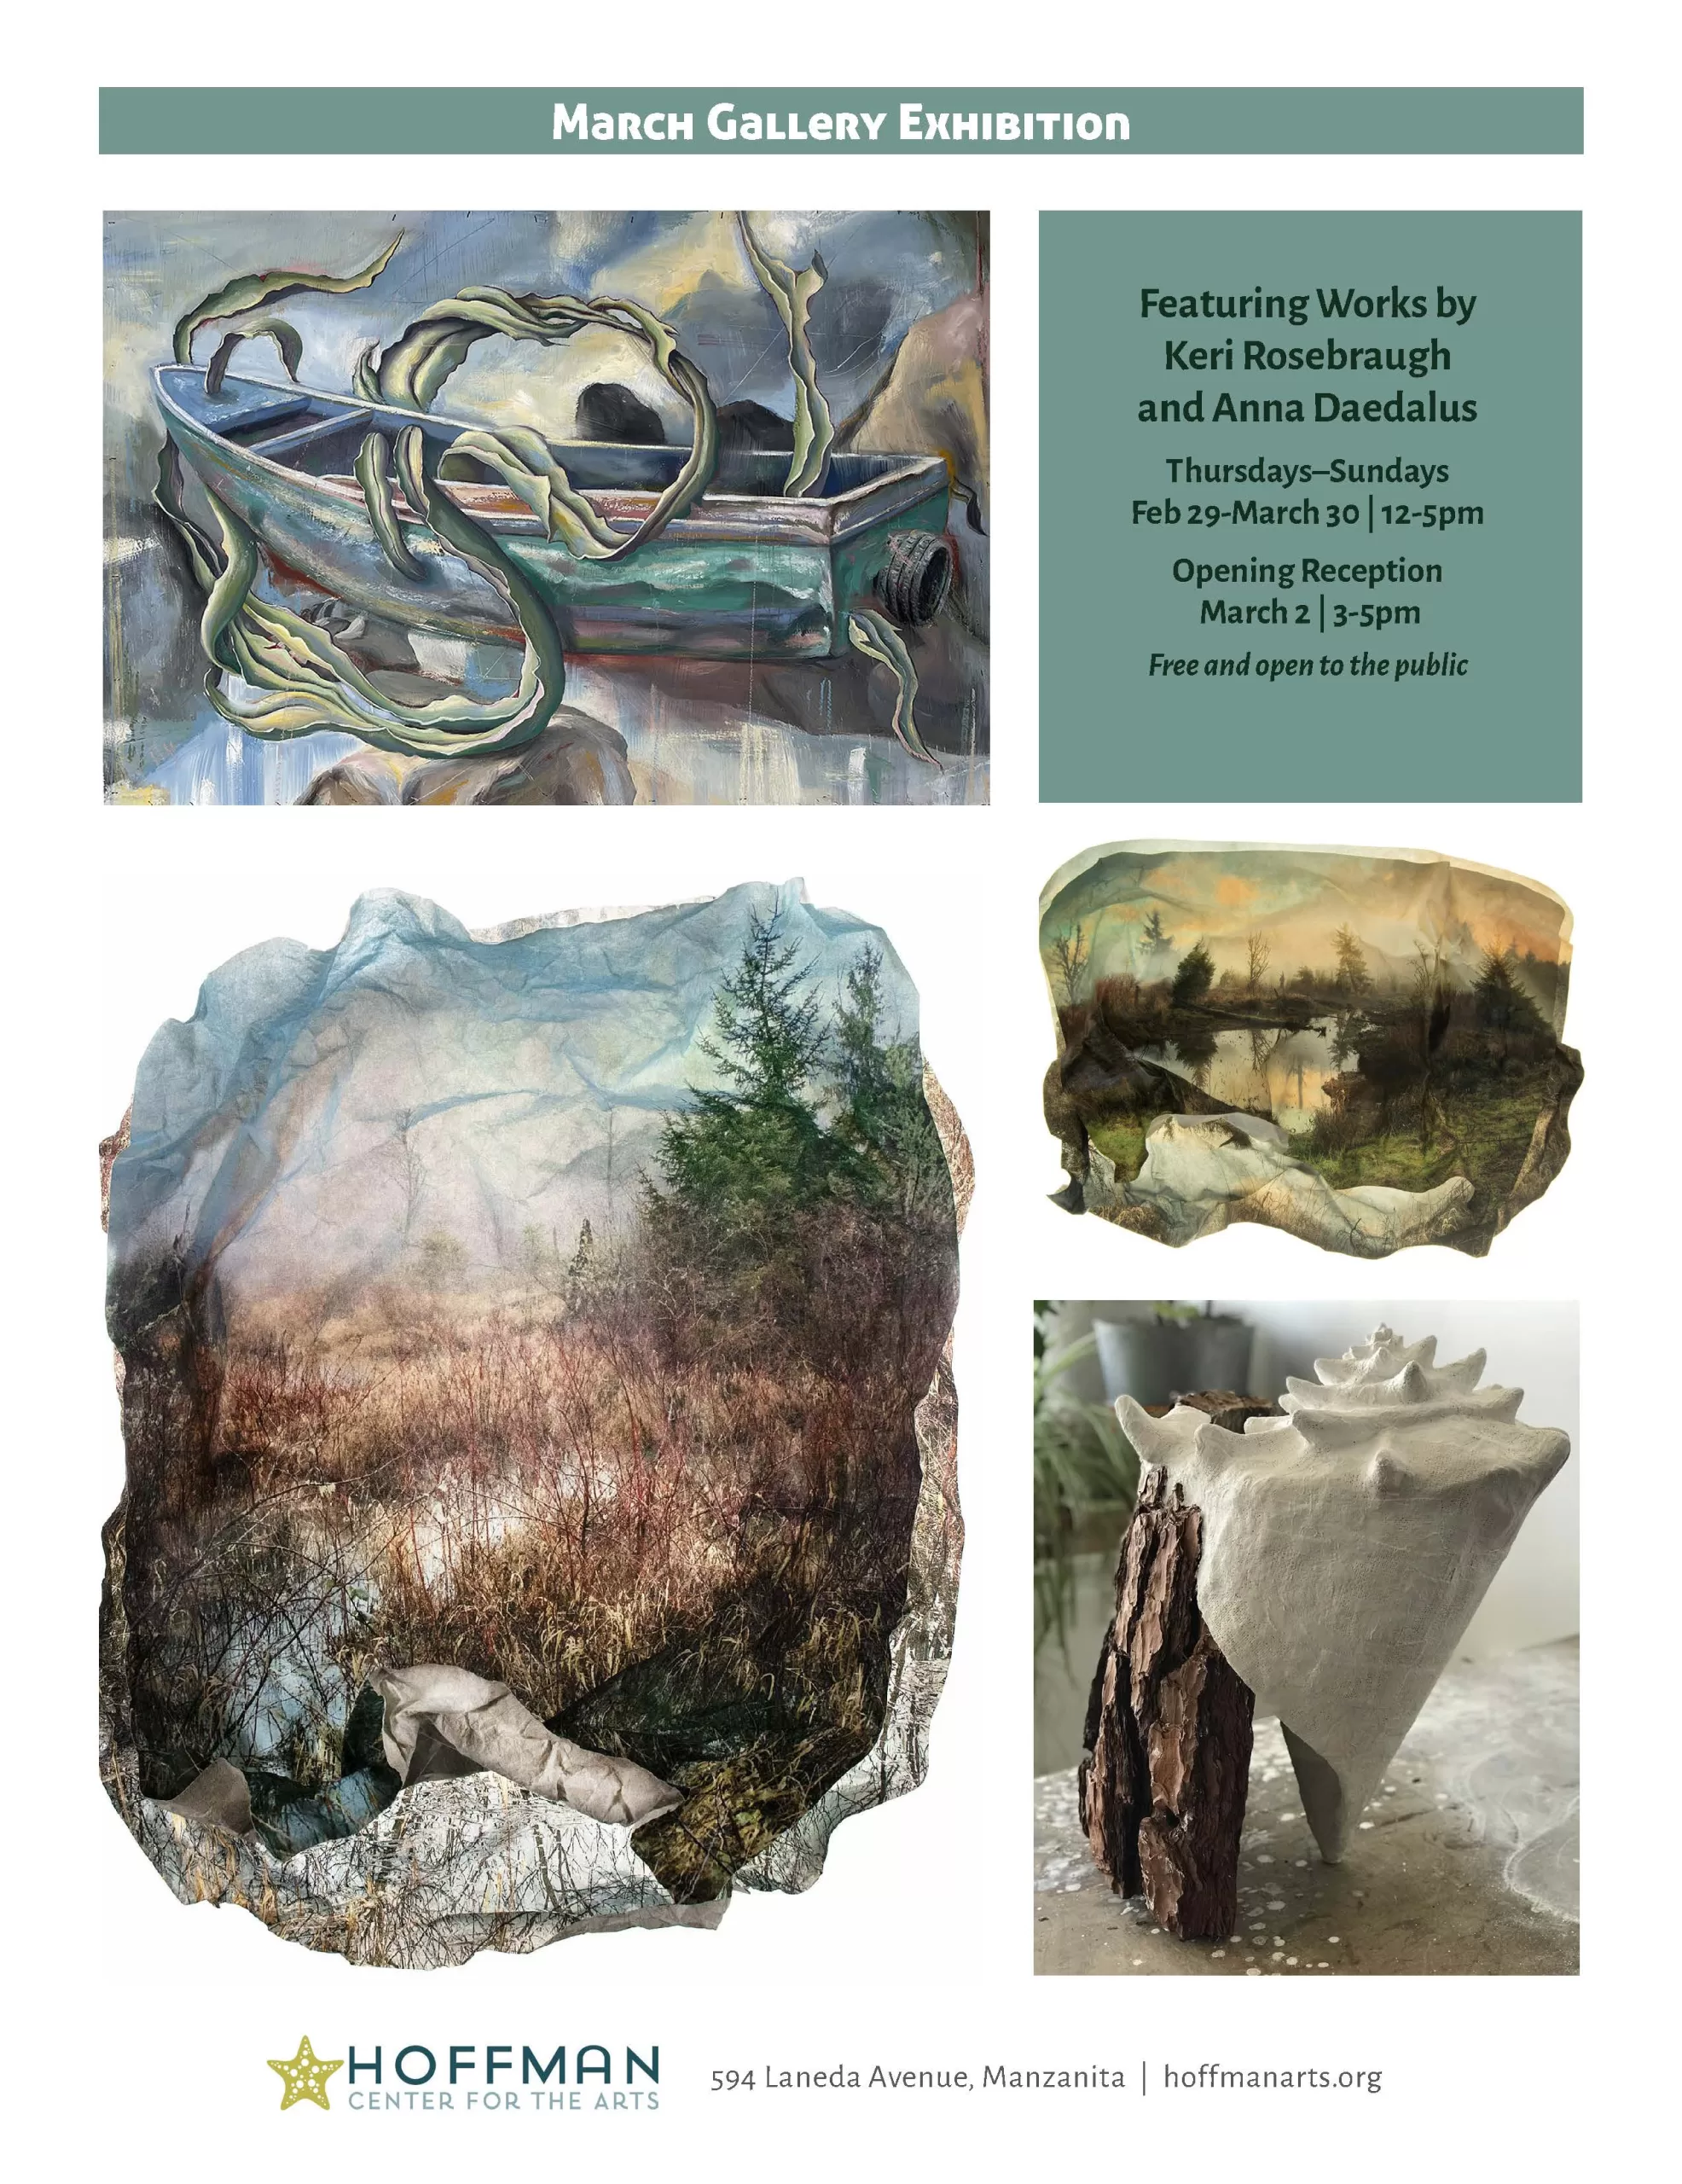 HOFFMAN CENTER FOR THE ARTS GALLERY SHOW IN MARCH FEATUREs KERI ROSEBRAUGH AND ANNA DAEDALUS; ARTISTS RECEPTION MARCH 2nd